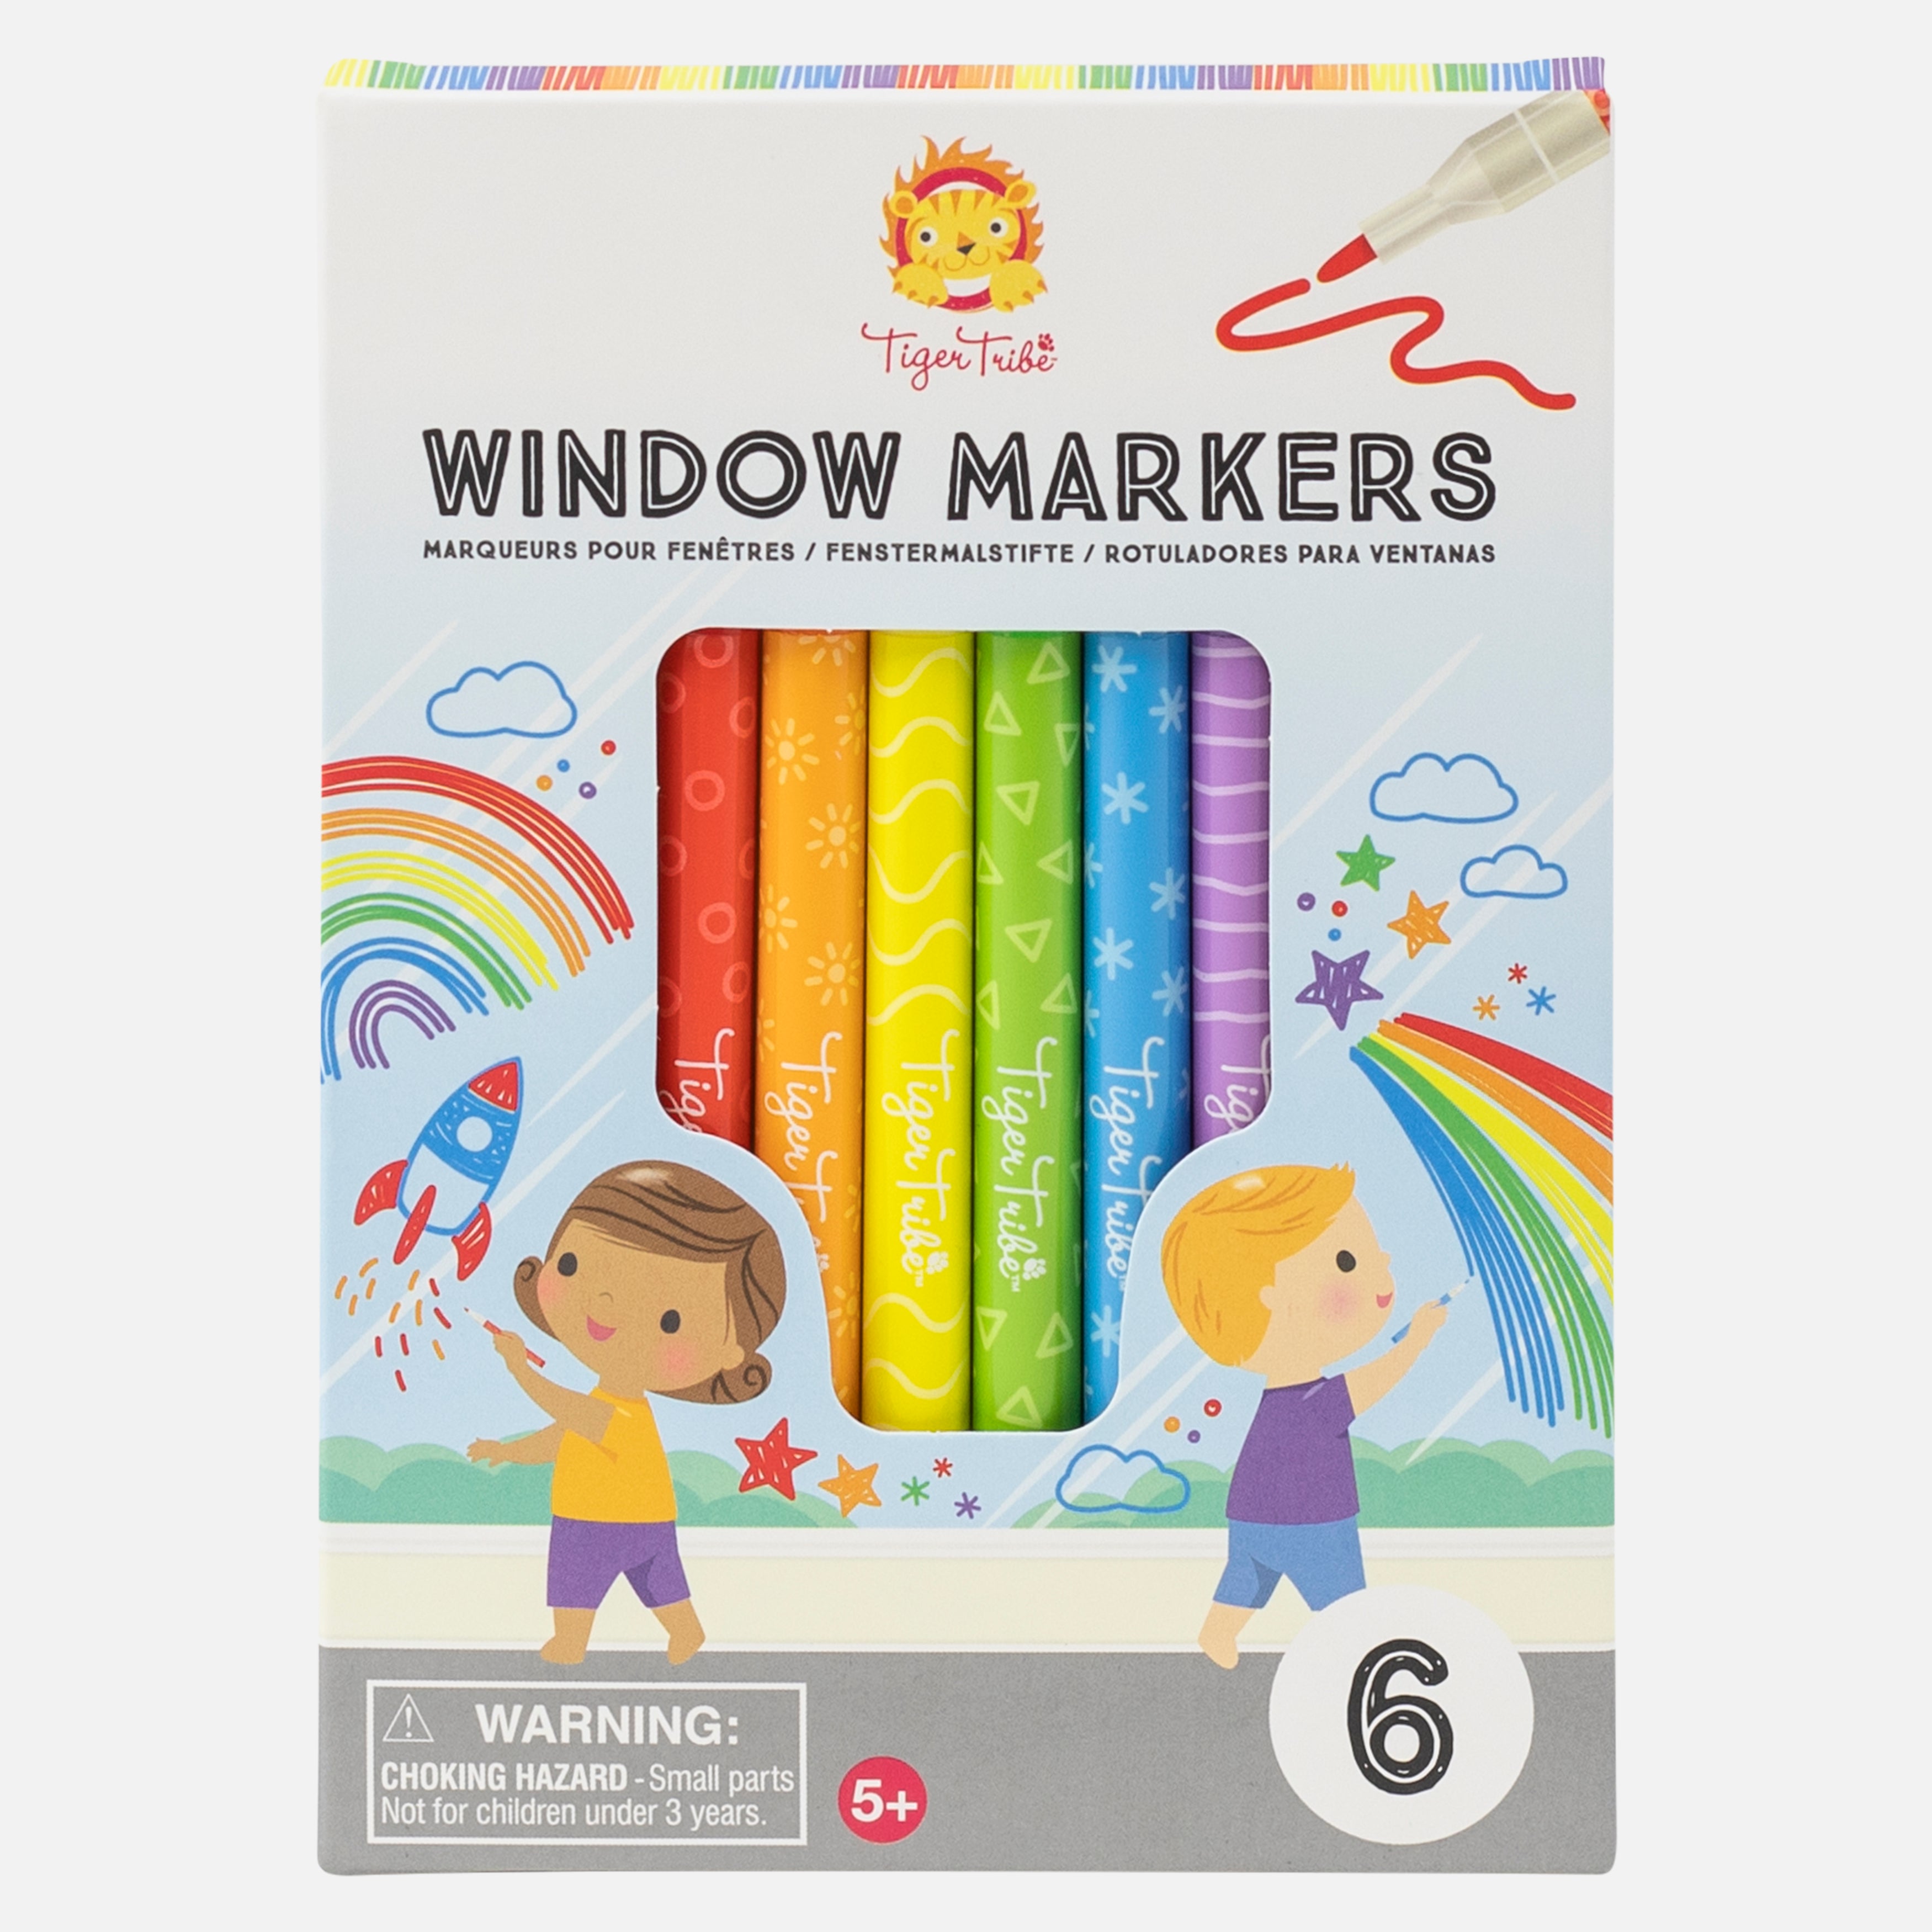 Window-Markers_pack-front-g.jpg